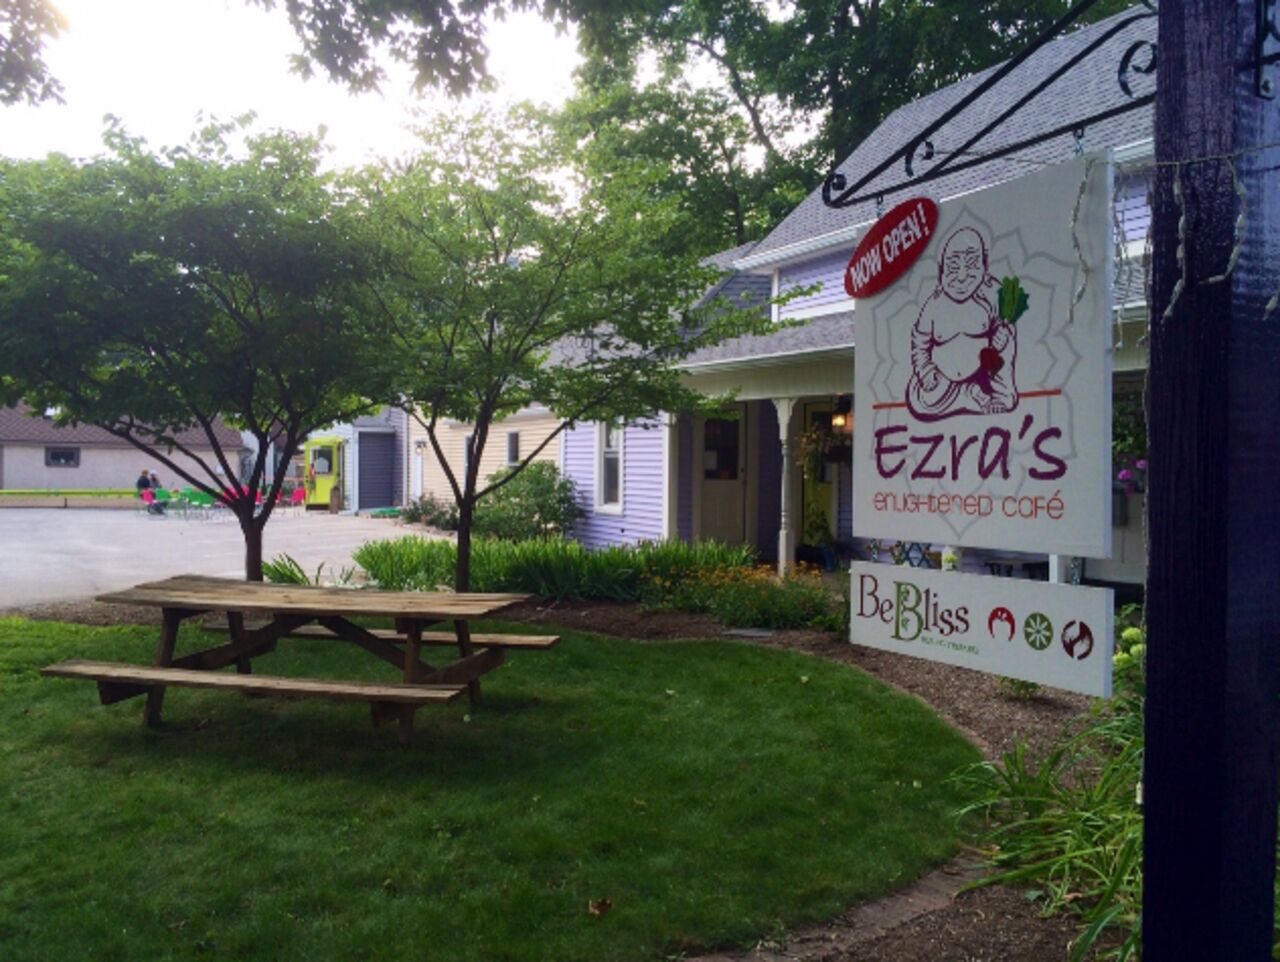 A photo of Ezra’s Enlightened Cafe